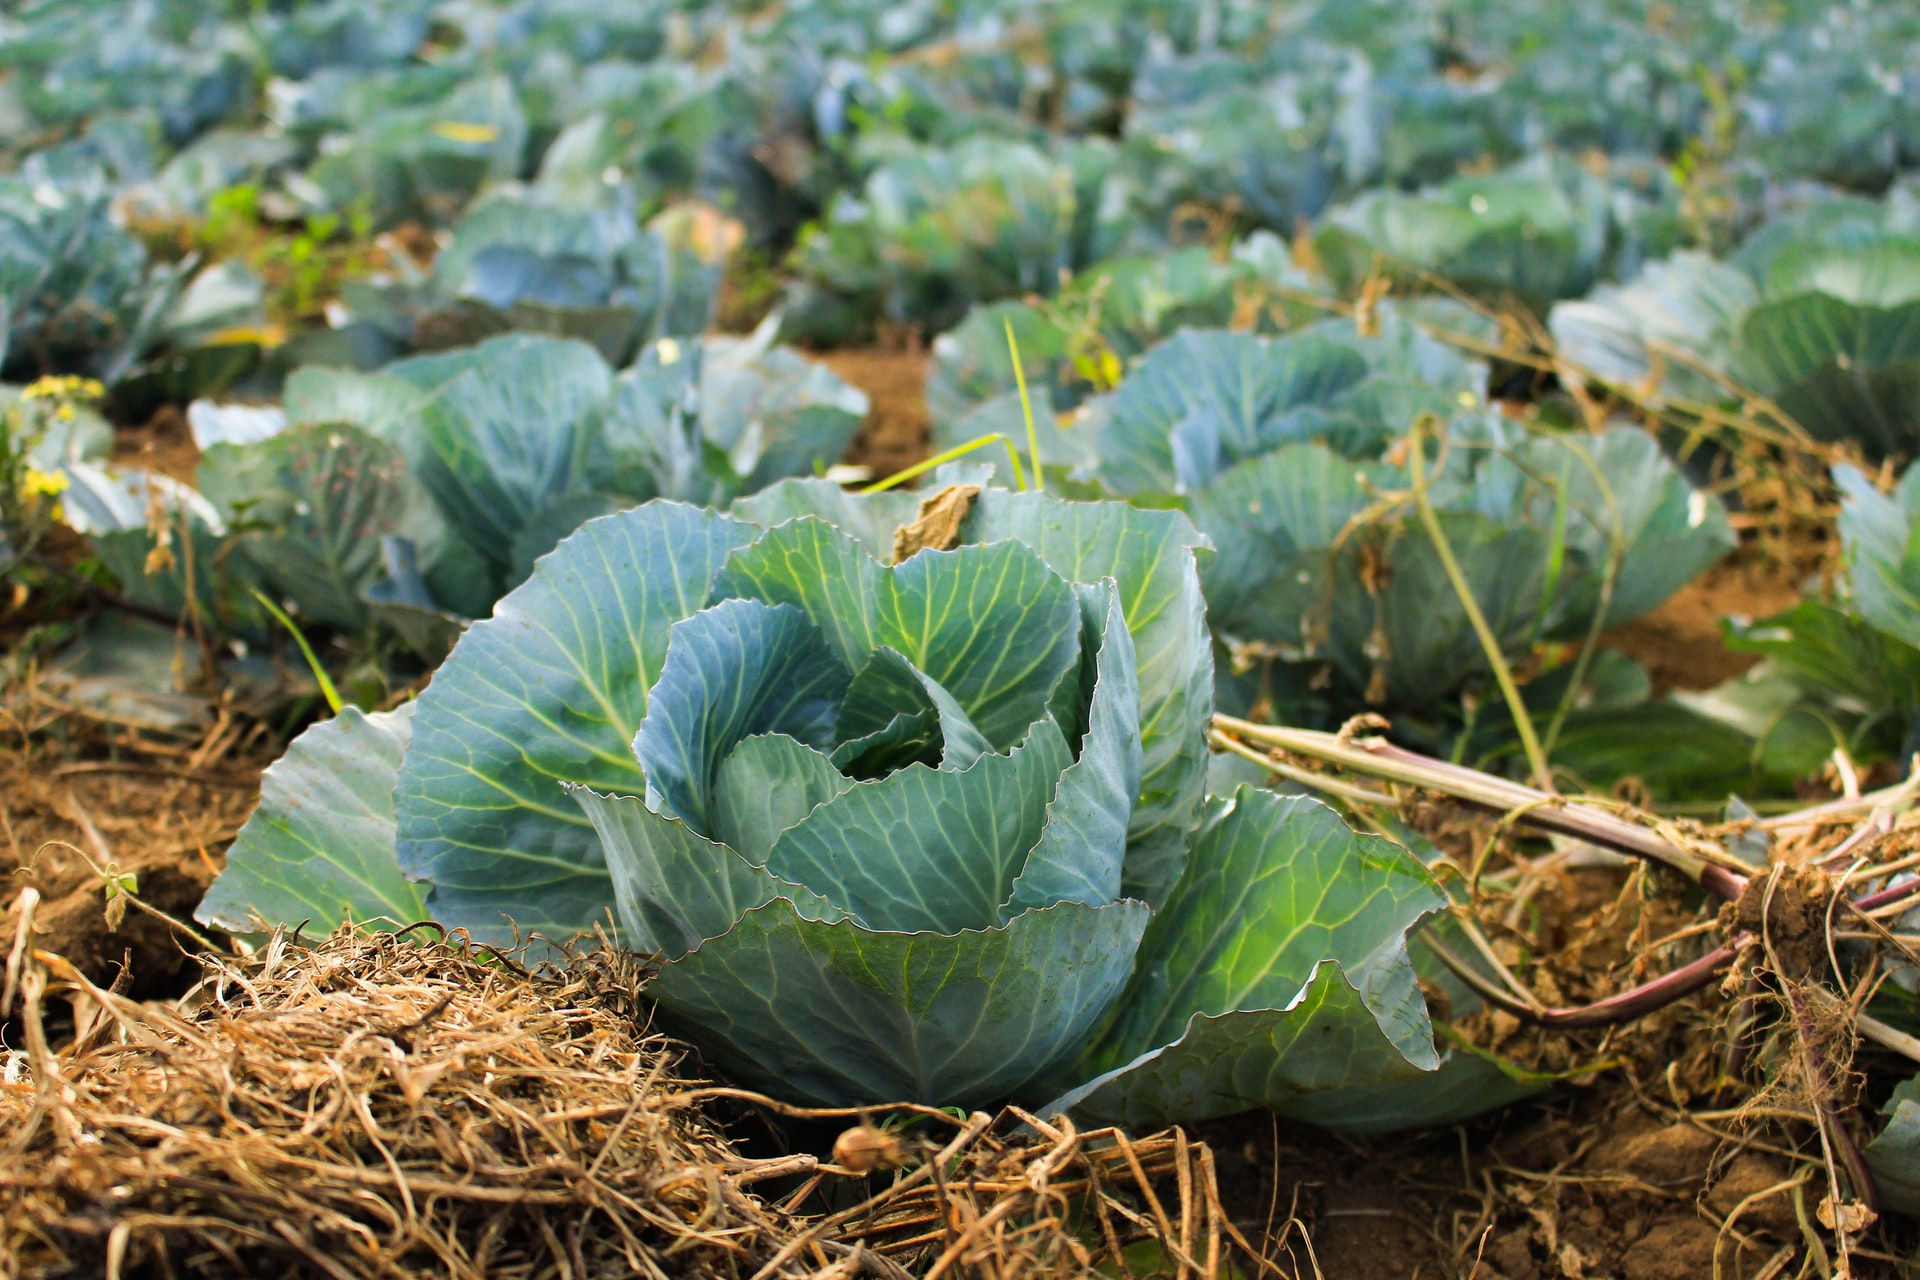  Gardening 101: How to grow your own cabbage, an incredibly versatile green